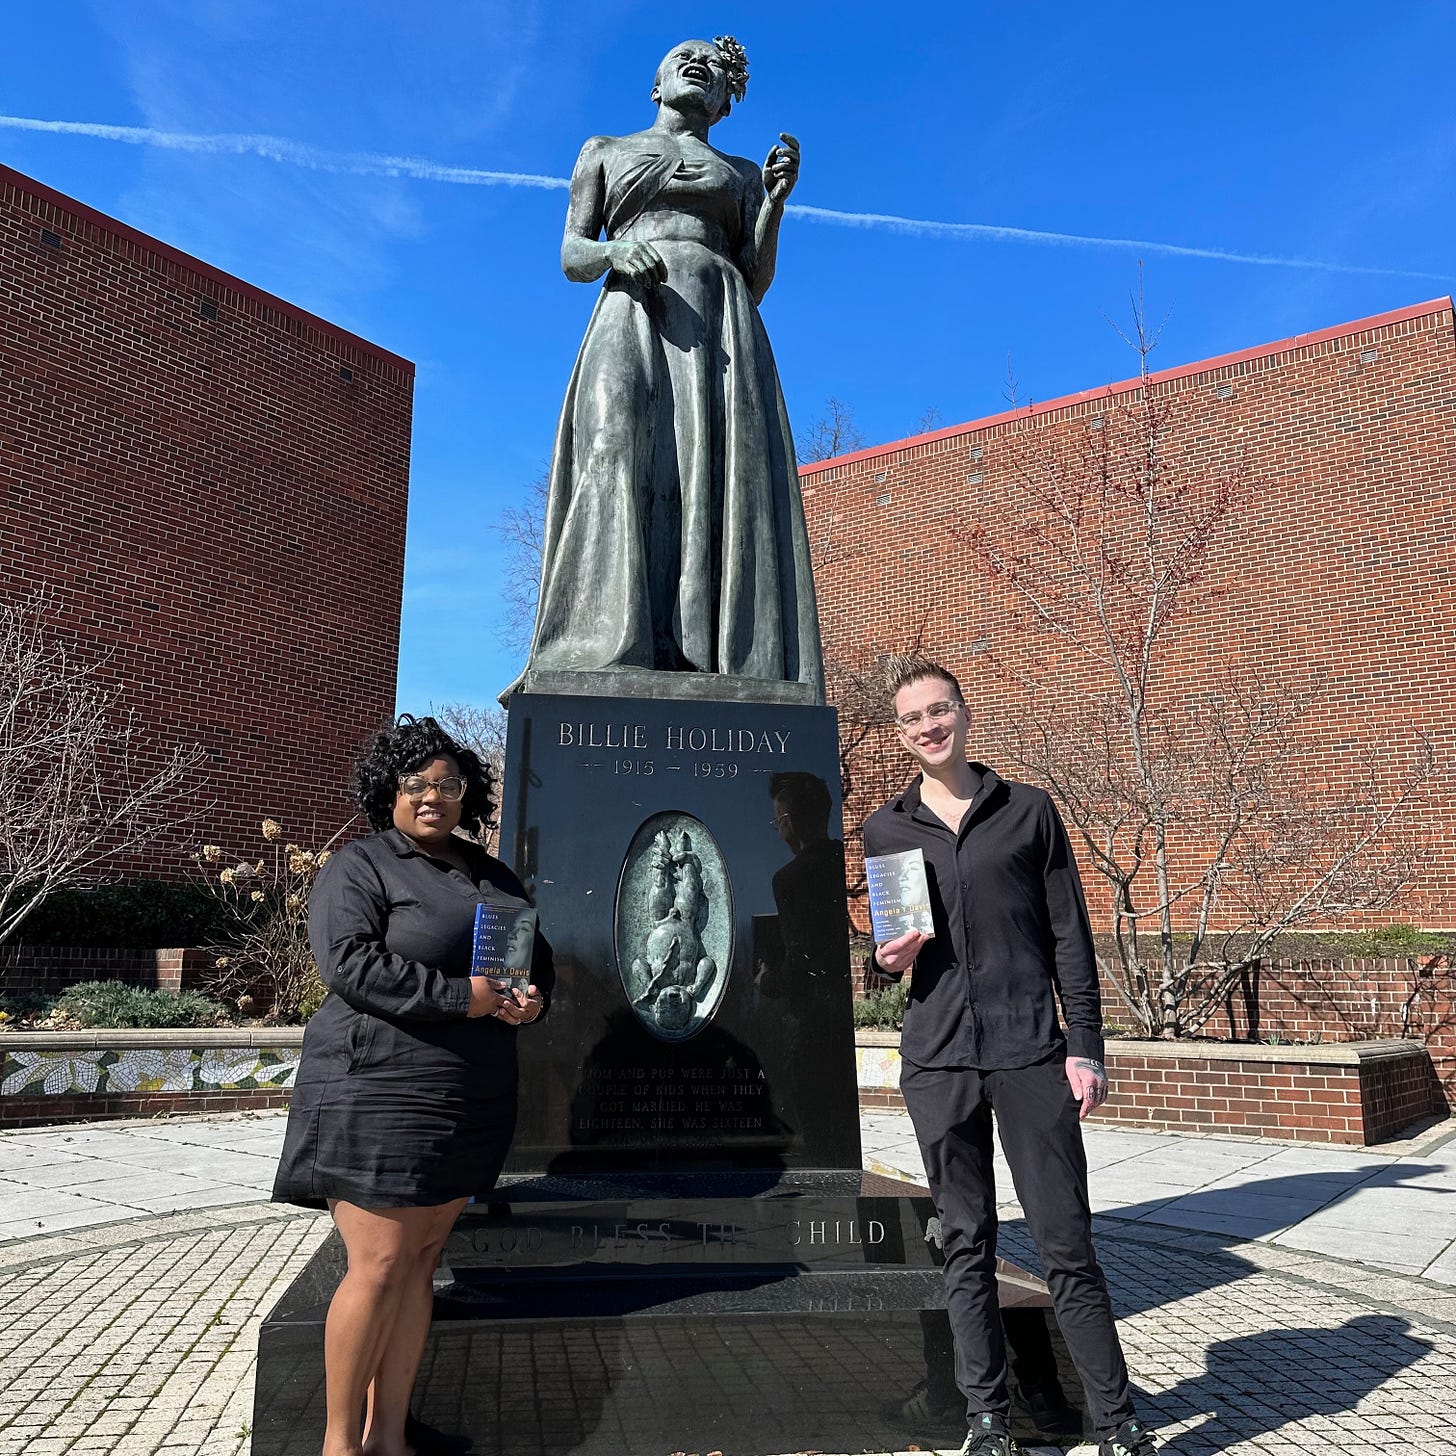 A color photograph of African American woman Tiheera Blount and white man Emmanuel Mehr posing beside the Billie Holiday statue in Baltimore. They both hold a copy of Angela Y. Davis's book Blues Legacies and Black Feminism, which features an image of Holiday on its cover.